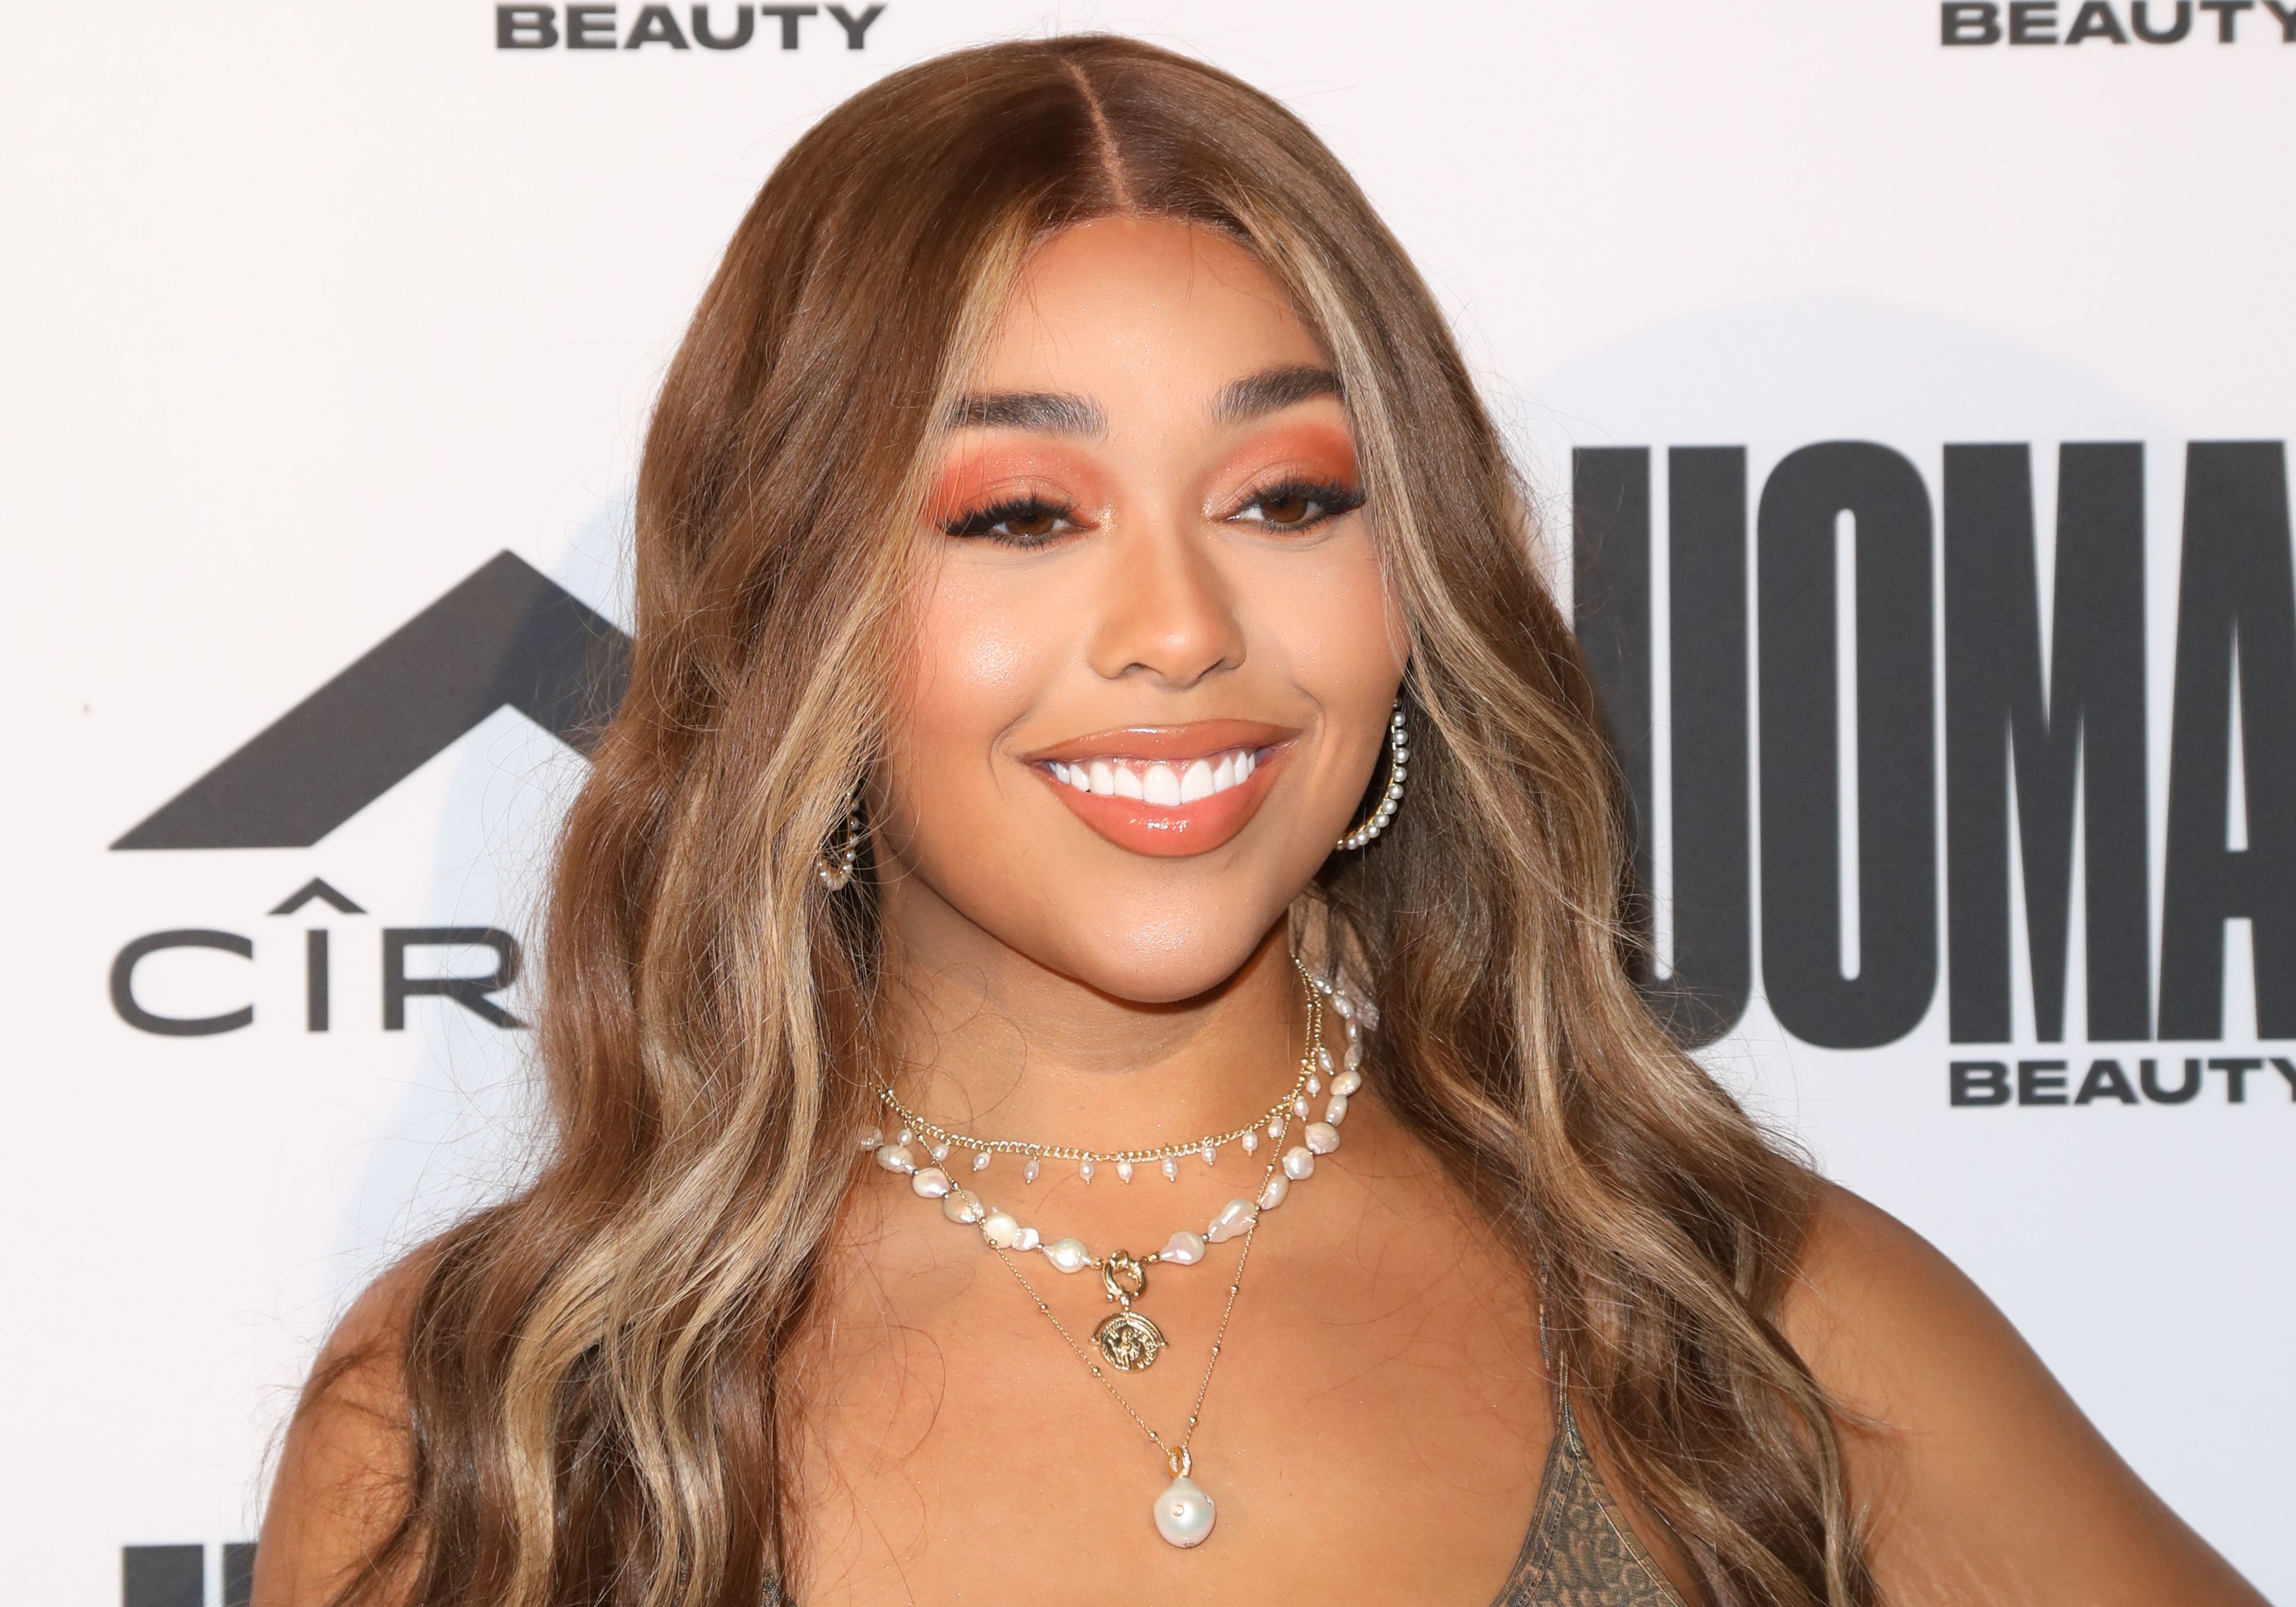 Jordyn Woods attends the UOMA Summer House LA at a Private Residence on August 10, 2019 in Beverly Hills, California. | Source: Getty Images